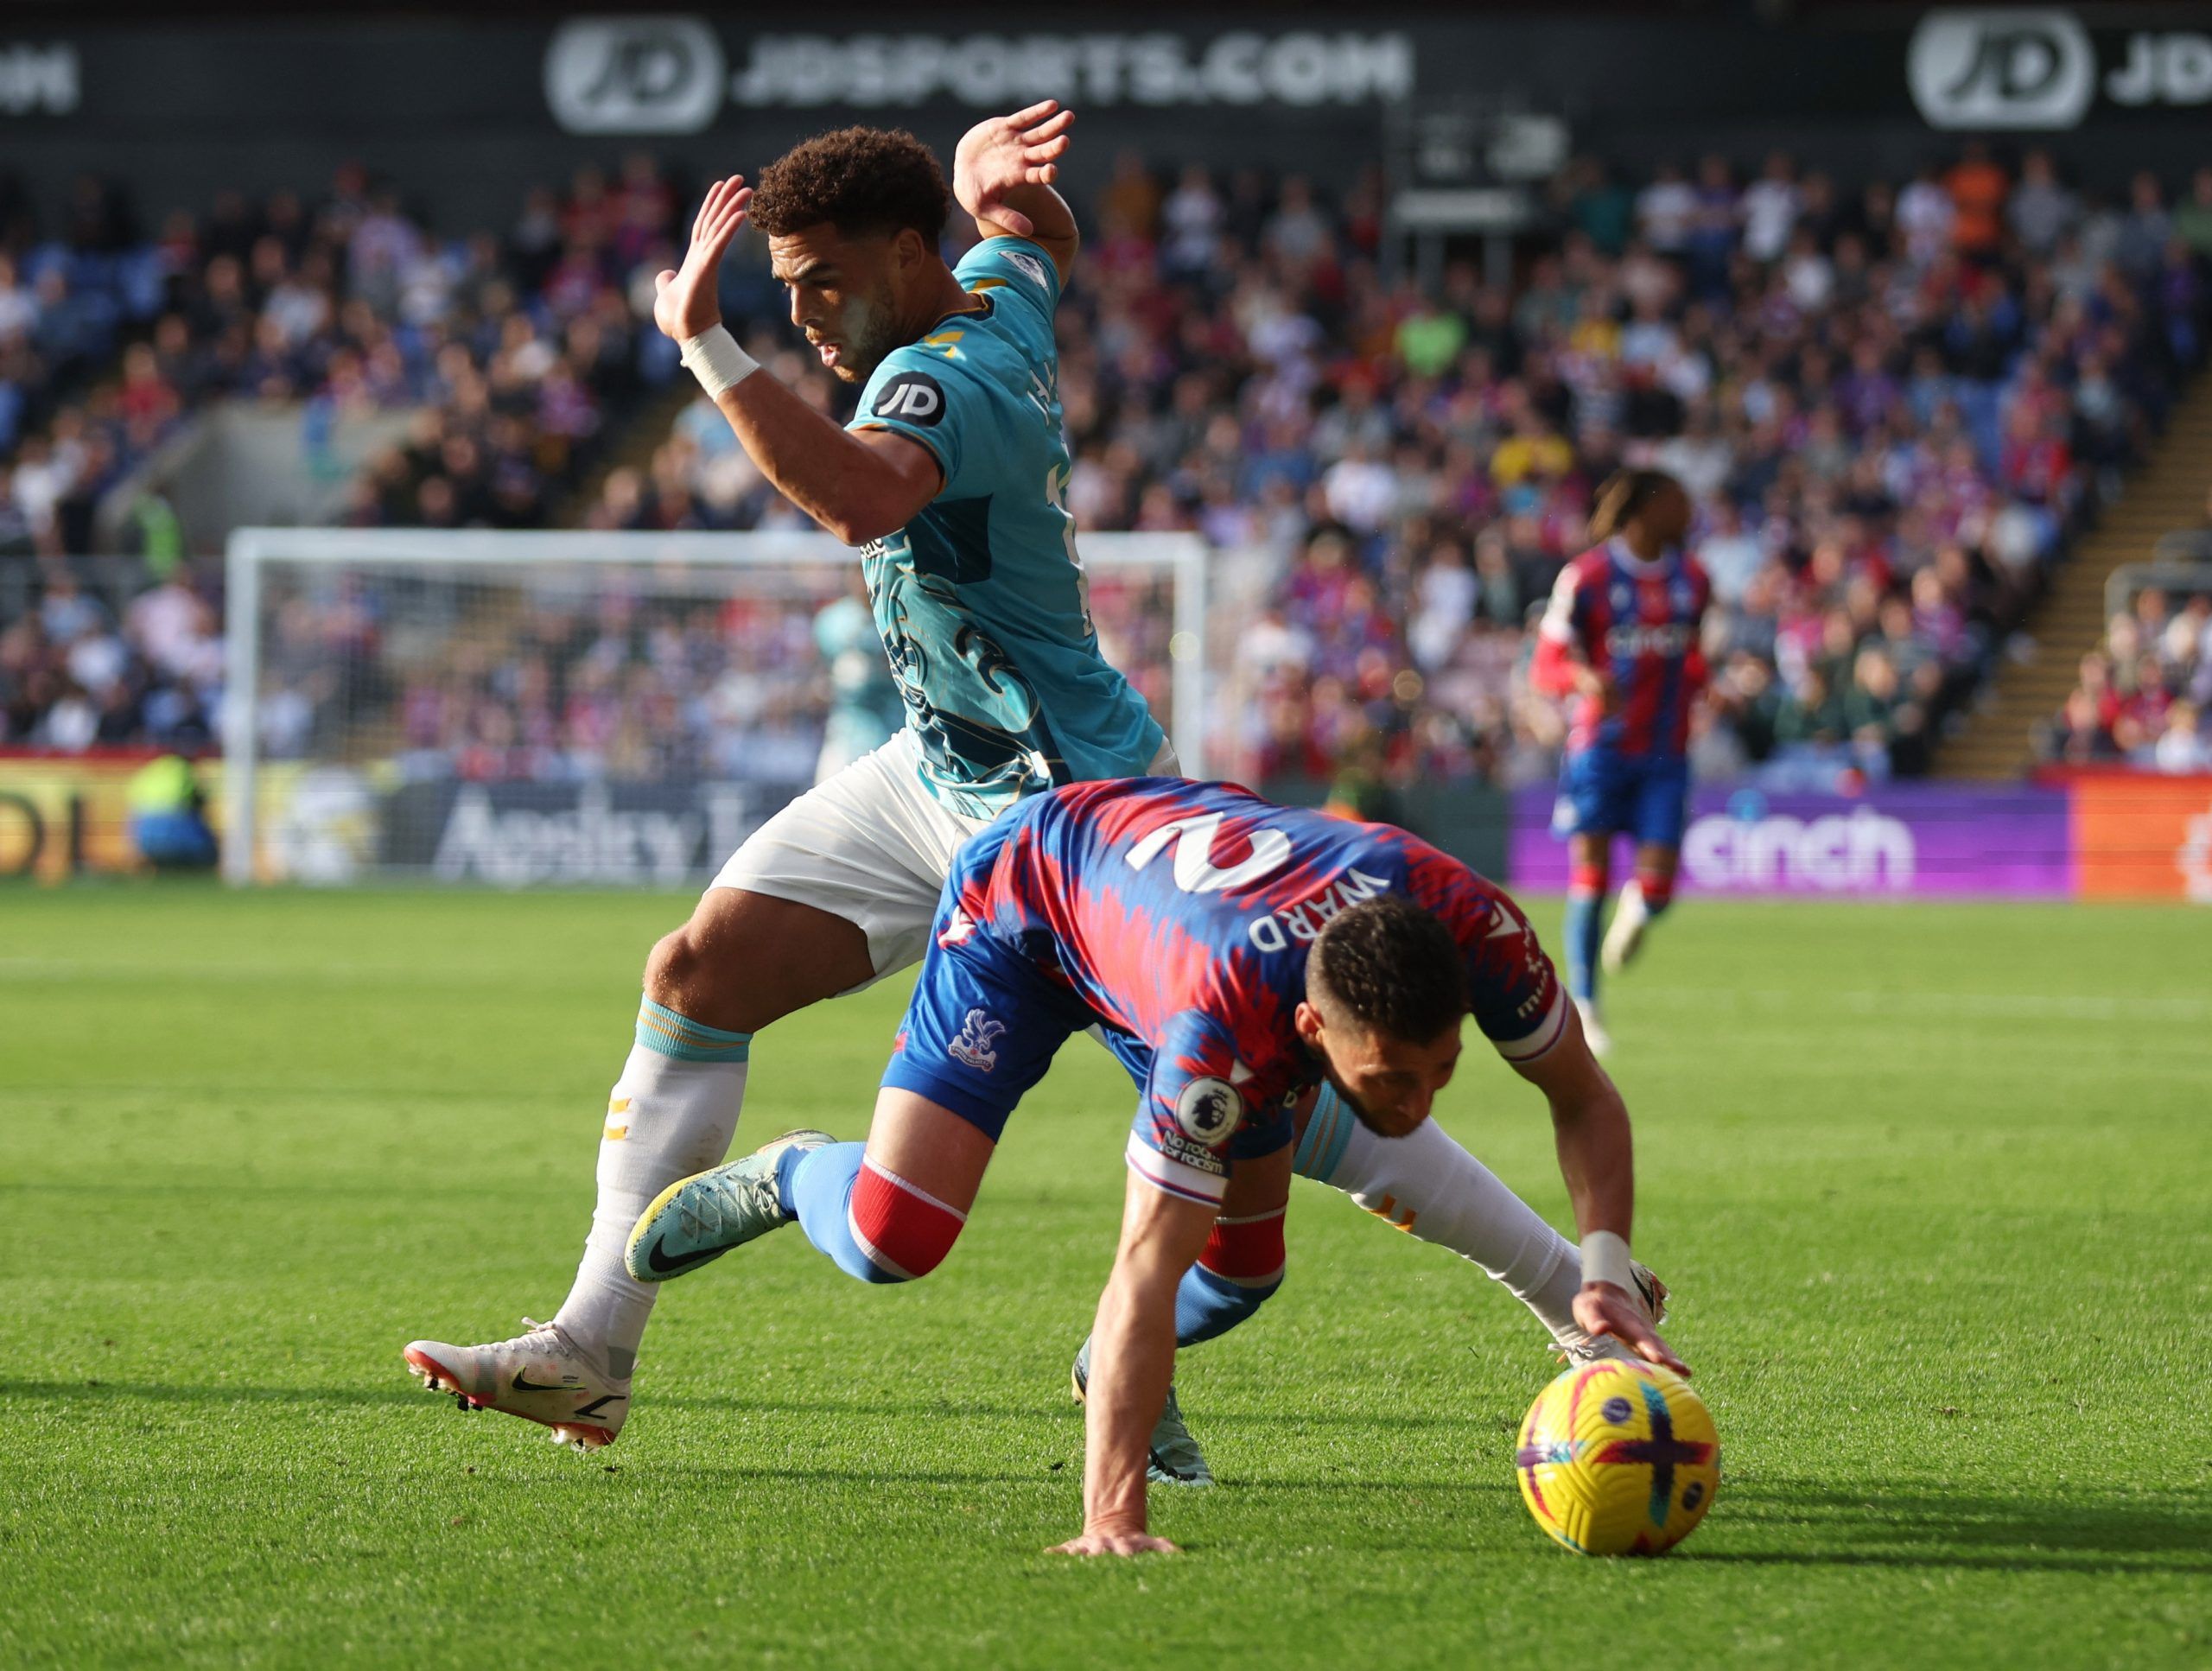 Soccer Football - Premier League - Crystal Palace v Southampton - Selhurst Park, London, Britain - October 29, 2022 Southampton's Che Adams in action with Crystal Palace's Joel Ward Action Images via Reuters/Matthew Childs EDITORIAL USE ONLY. No use with unauthorized audio, video, data, fixture lists, club/league logos or 'live' services. Online in-match use limited to 75 images, no video emulation. No use in betting, games or single club /league/player publications.  Please contact your account